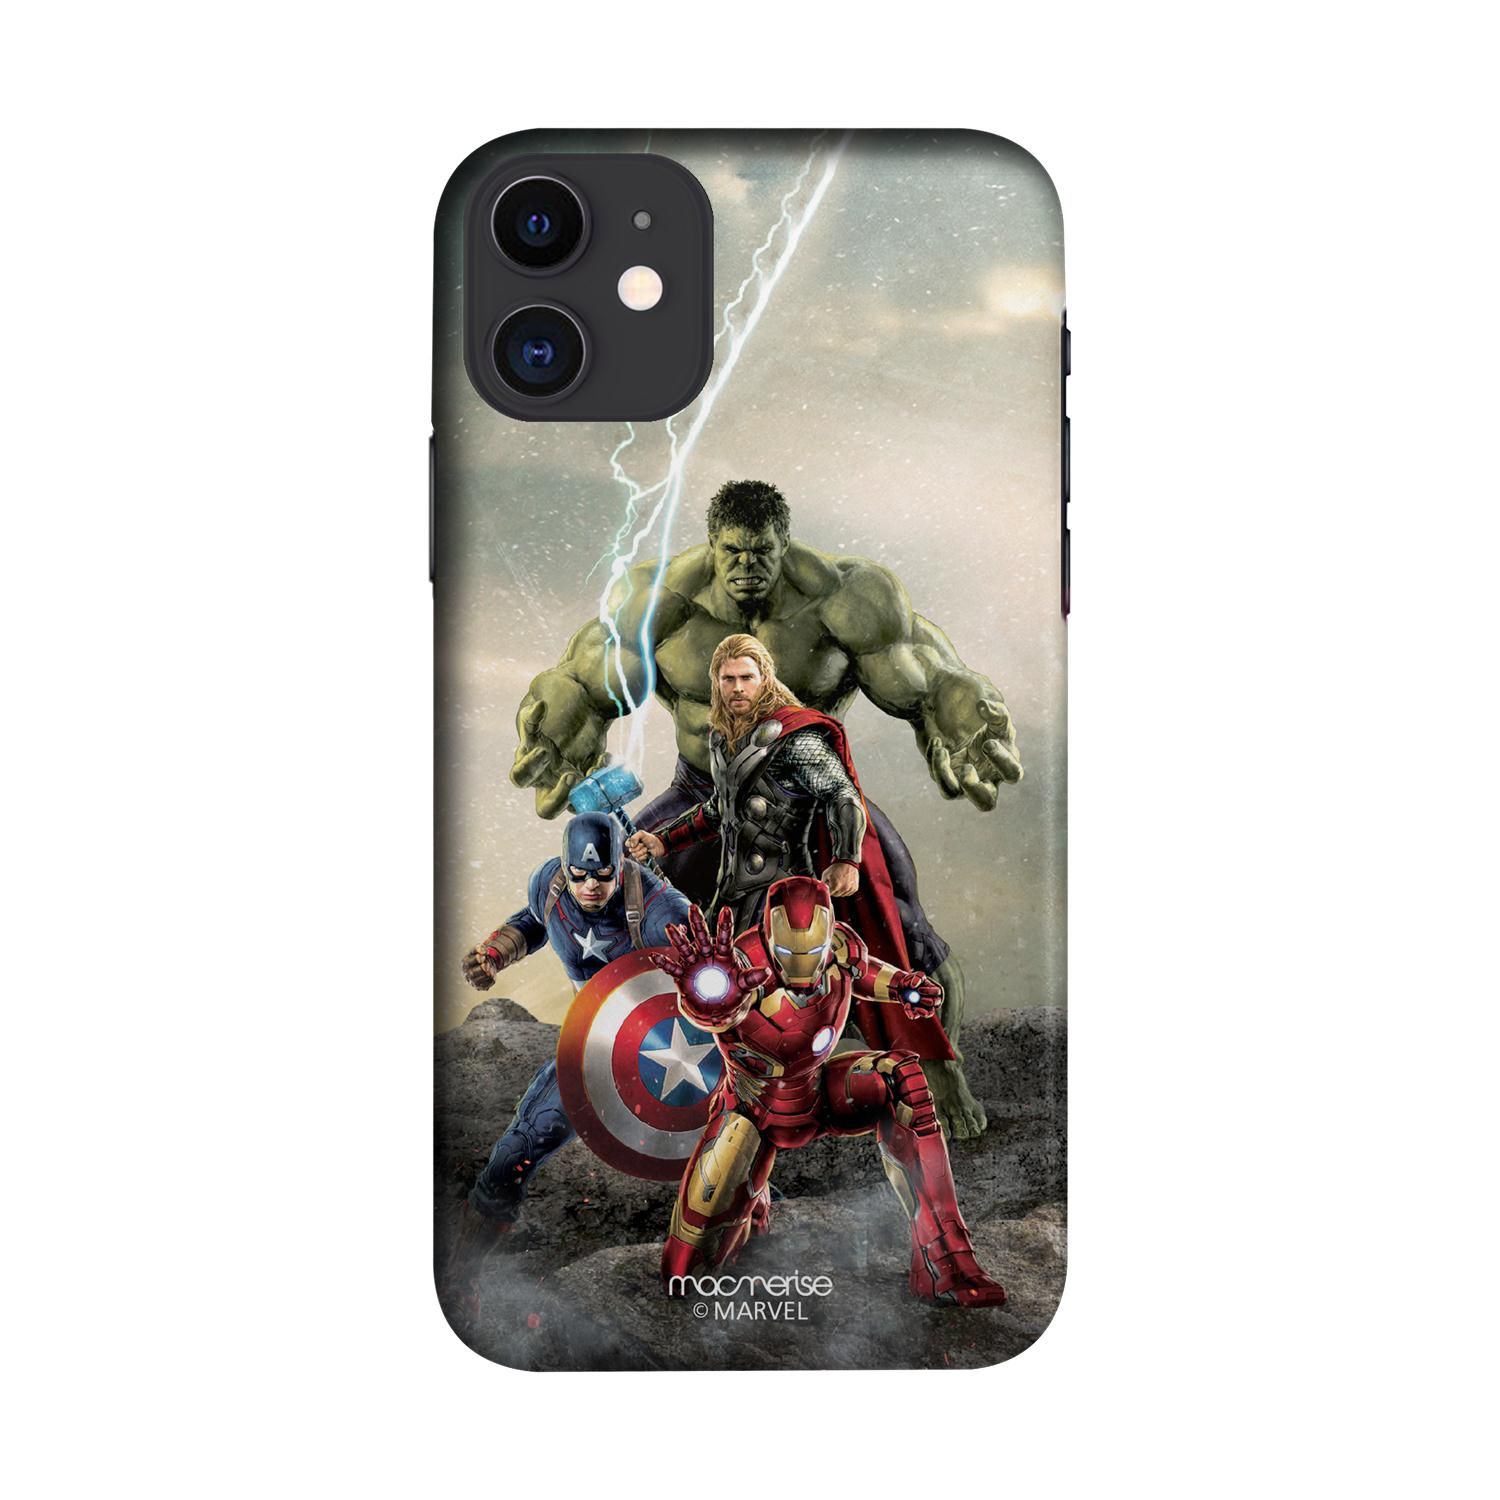 Buy Time to Avenge - Sleek Phone Case for iPhone 11 Online